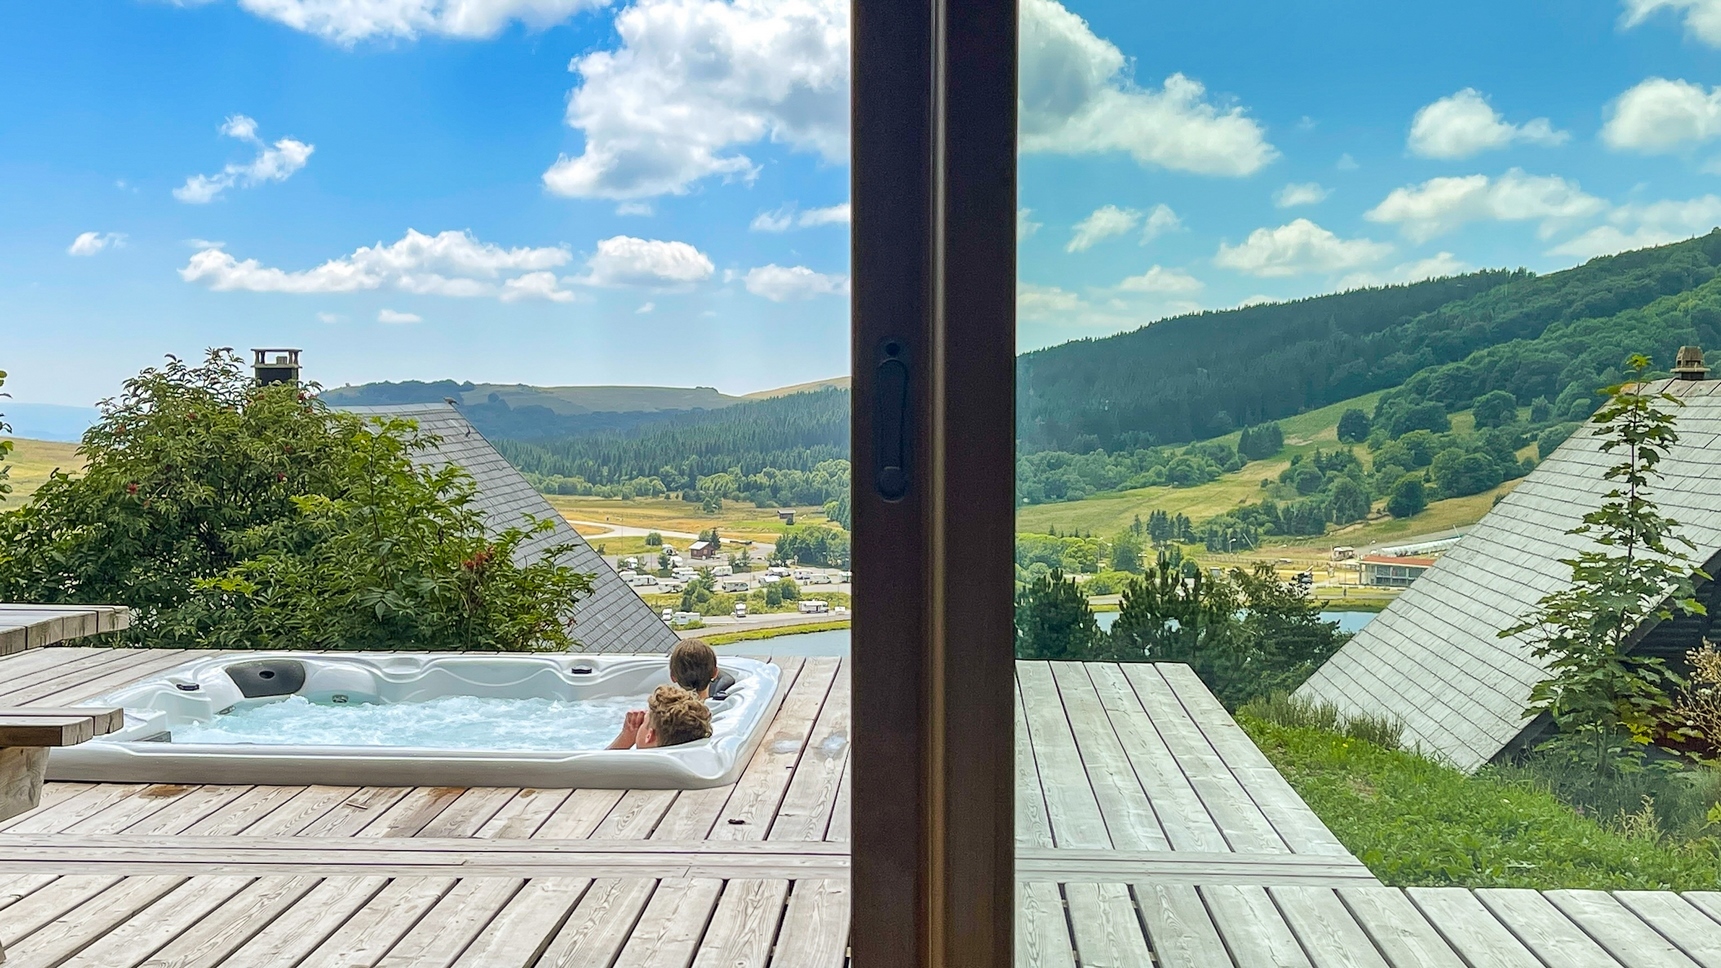 During your summer stay, the Chalet l'Anorak Jacuzzi, a moment of relaxation at the chalet l'Anorak in Super Besse